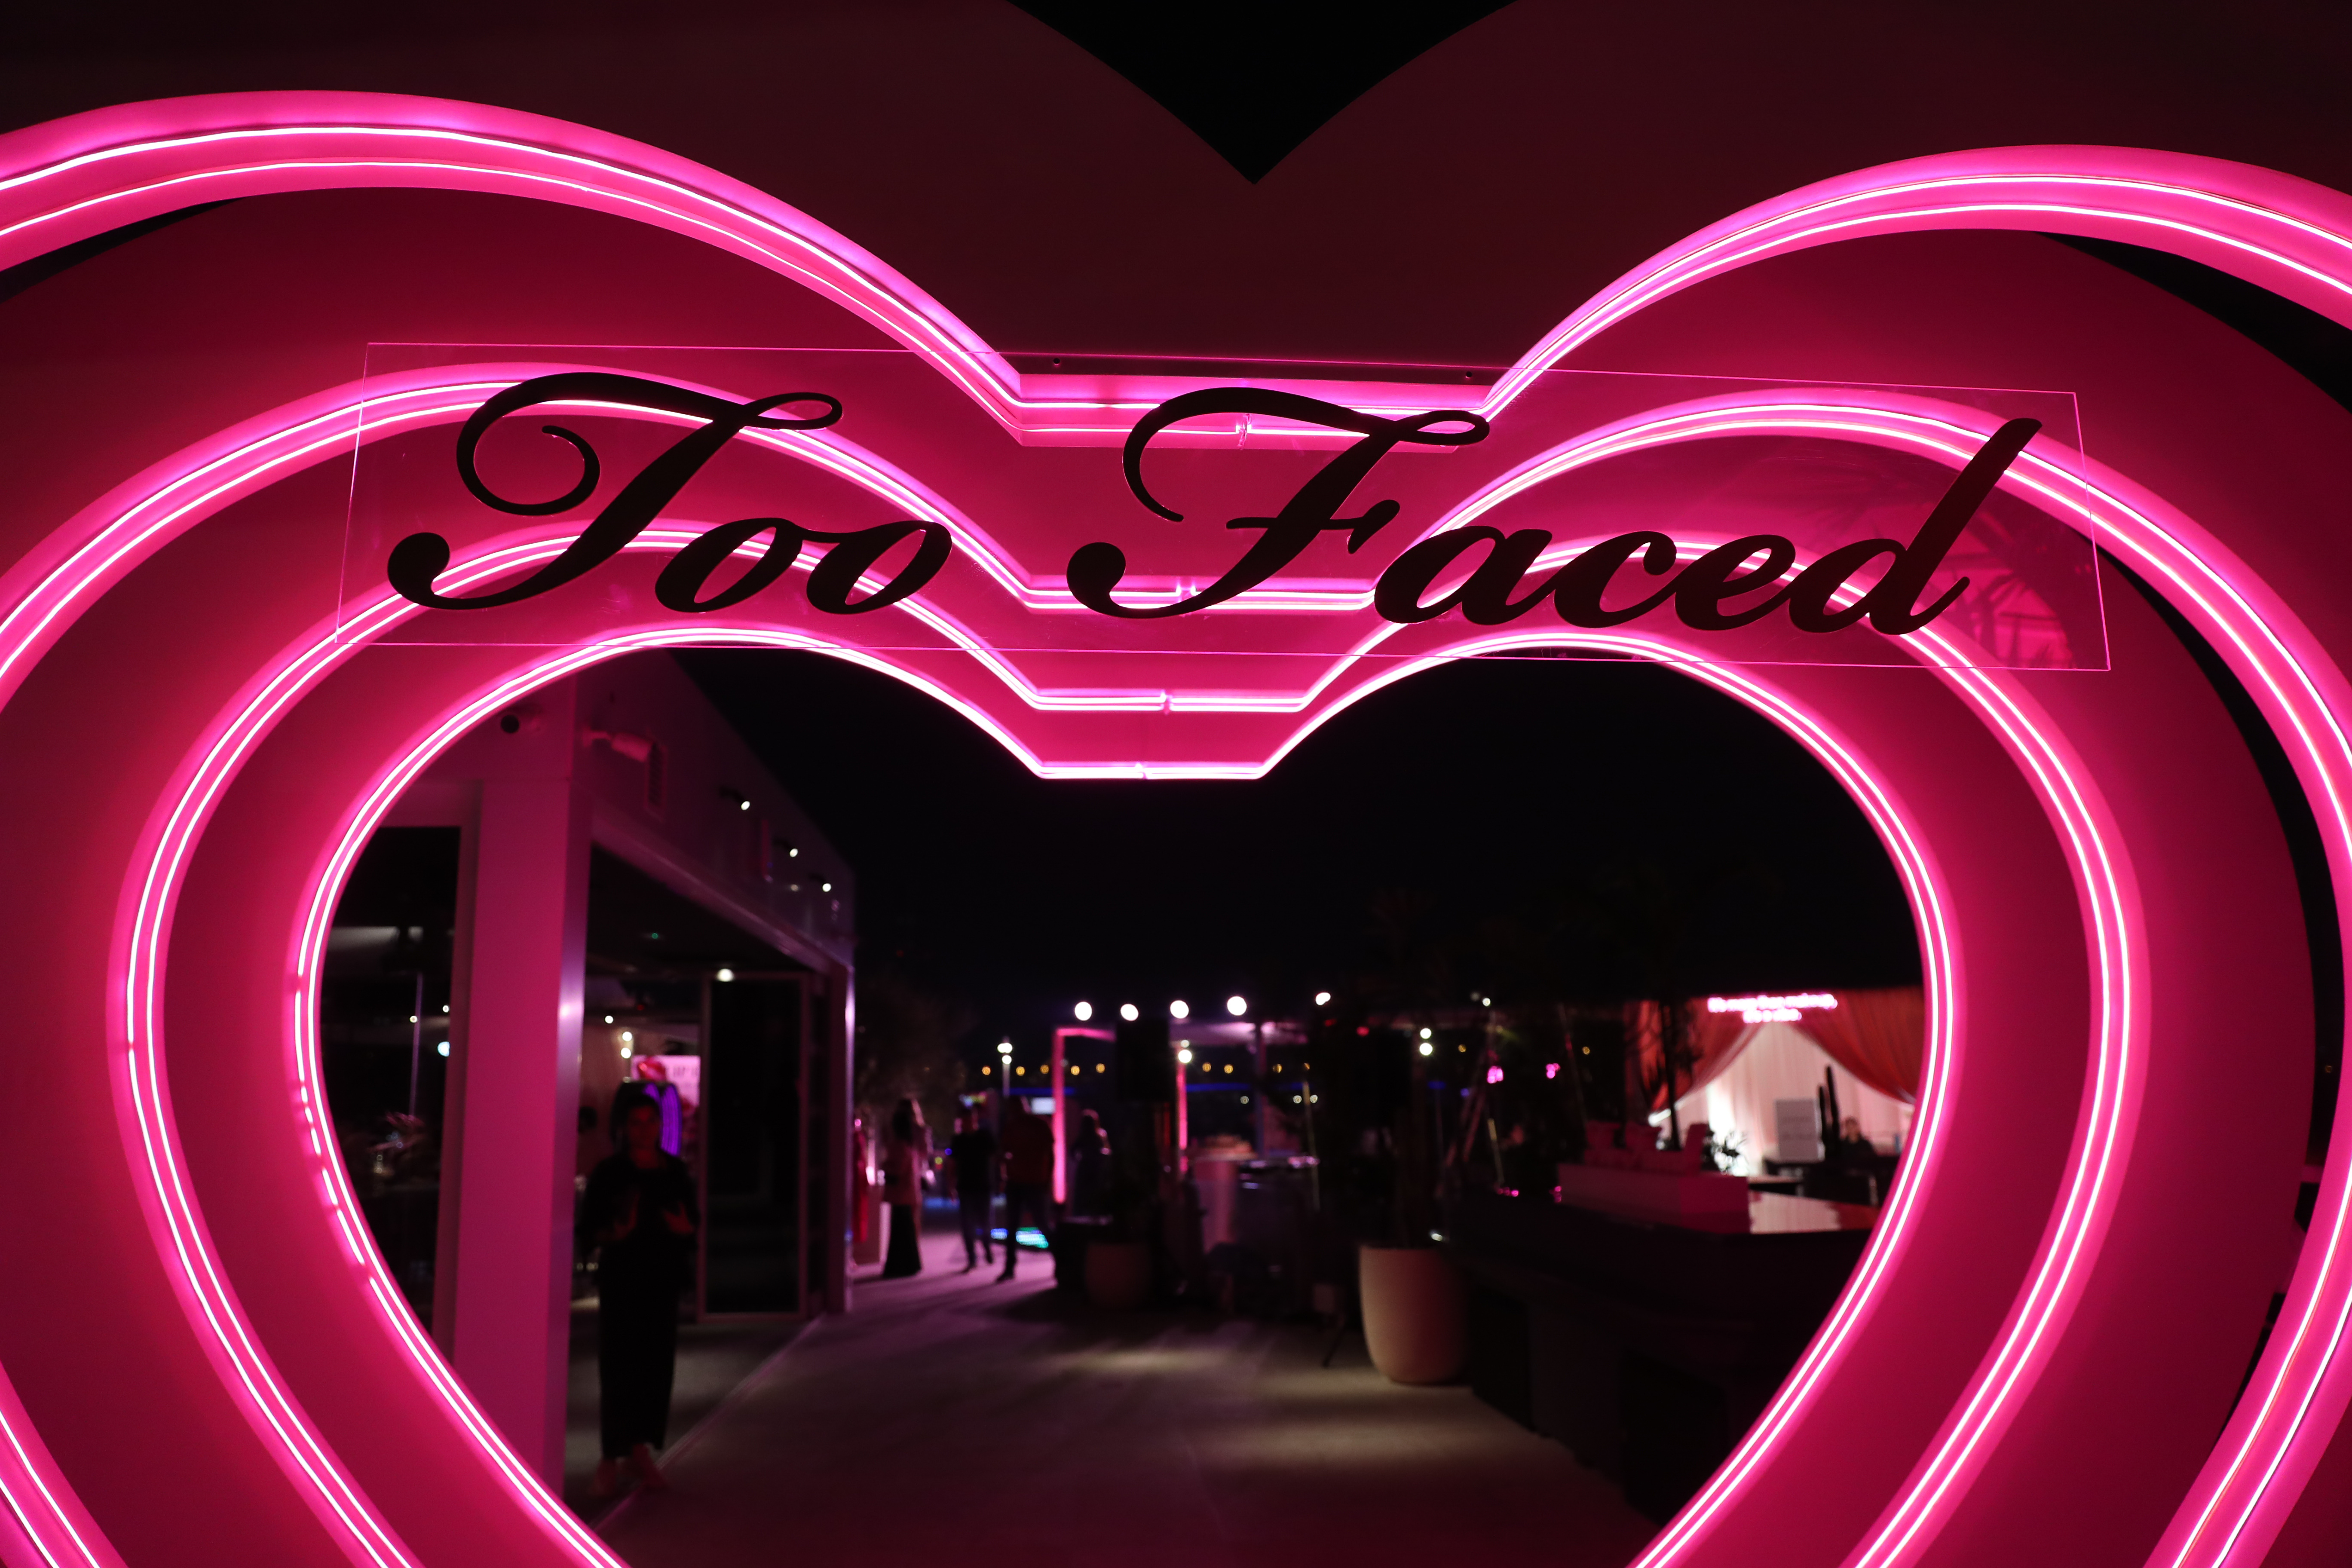 Too Faced x Sephora - Catch Too Faced Feelings Event